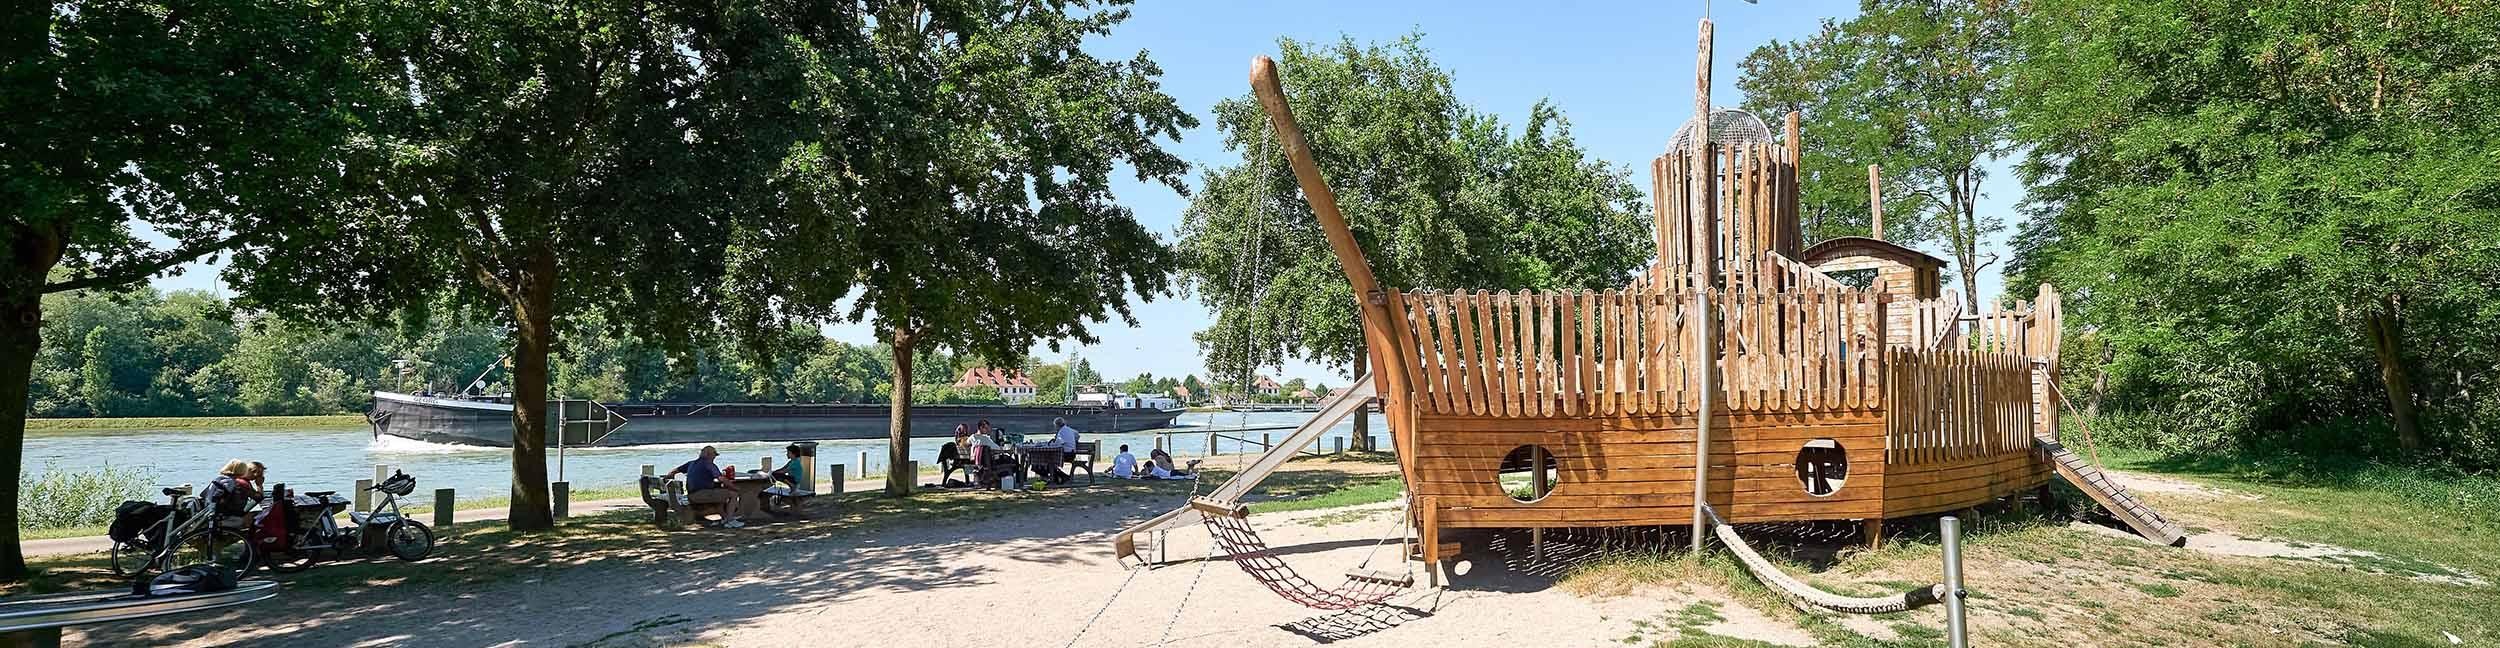 Pirate playground on the banks of the Rhine in Plittersdorf